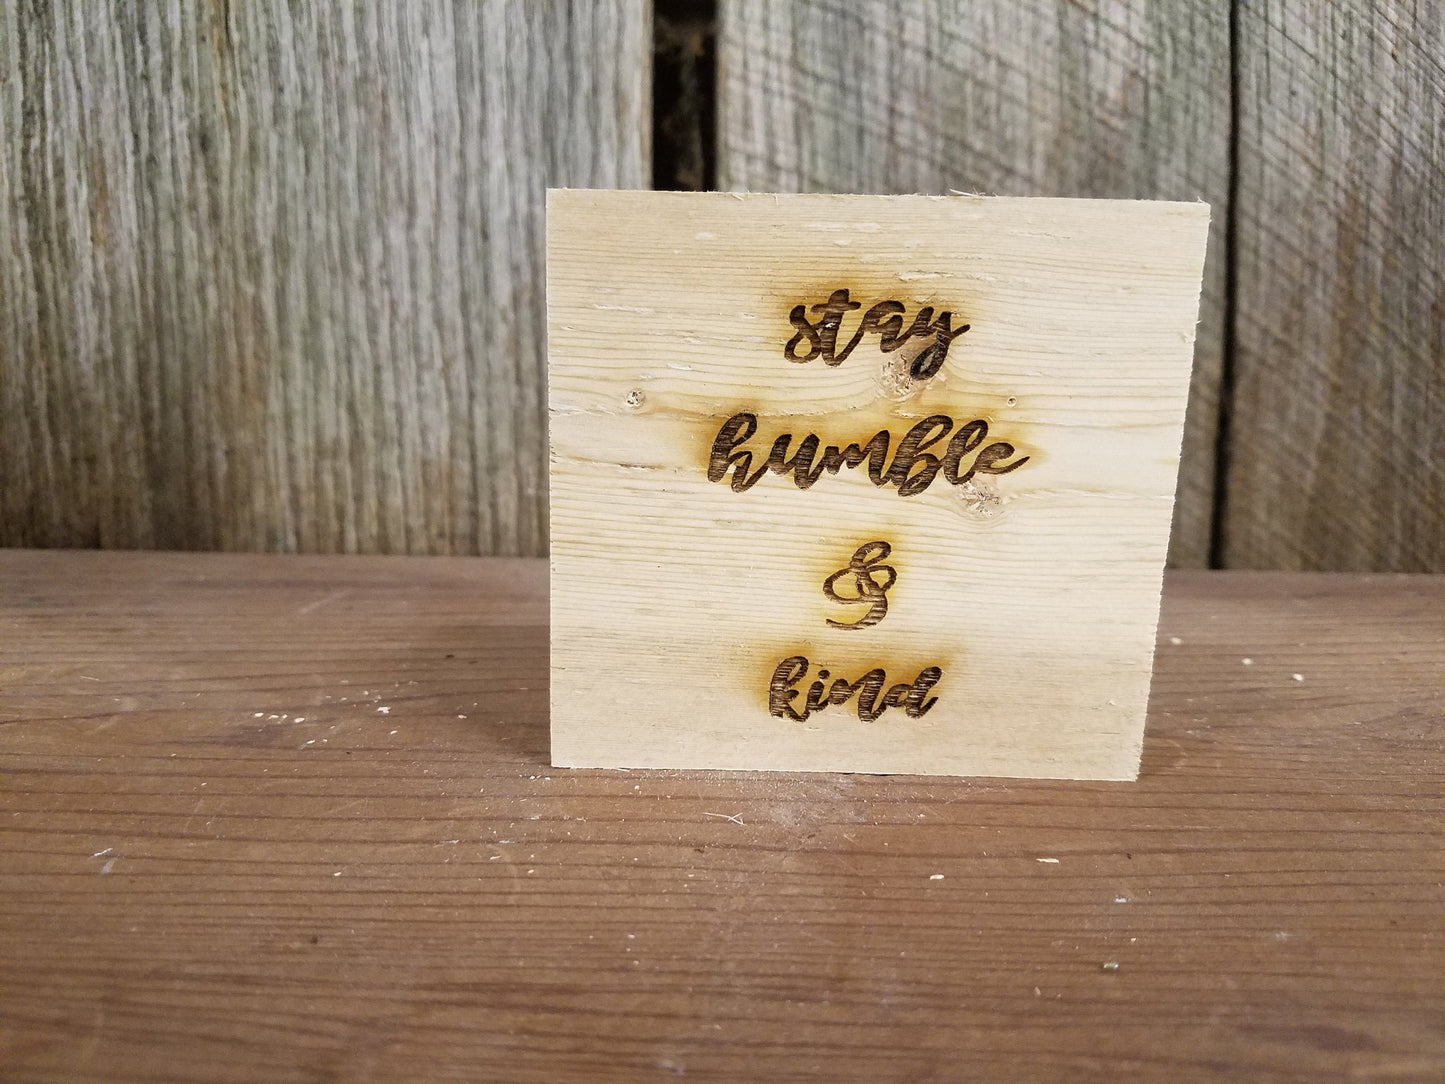 Stay Humble and Kind, Block,  Tiered Tray Decor, Rustic, Pine, Self Sitter,  Handmade, Wood, Laser Engraved, Primitive, Encouragement Gift